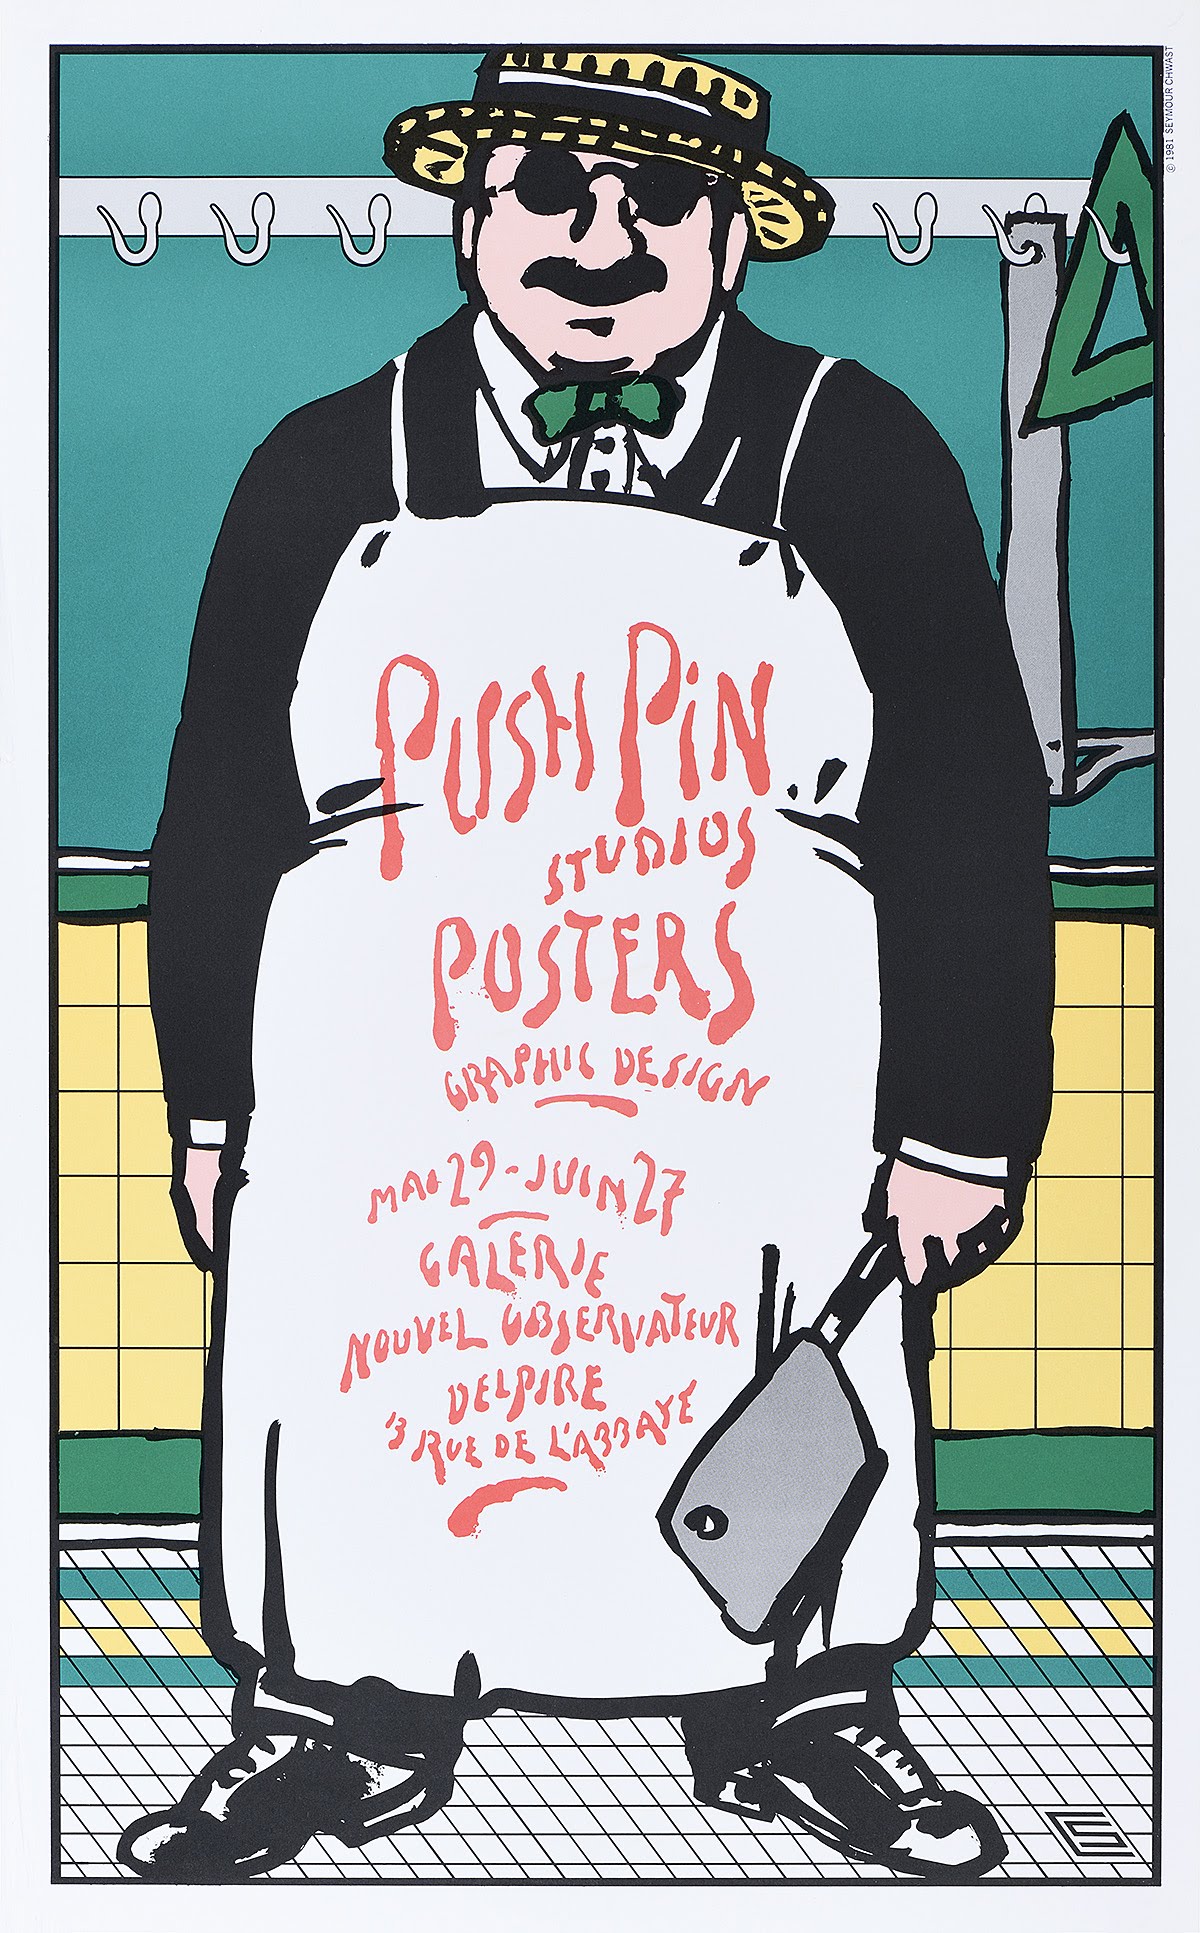 Illustrational poster of a butcher holding a knife with text on his apron.